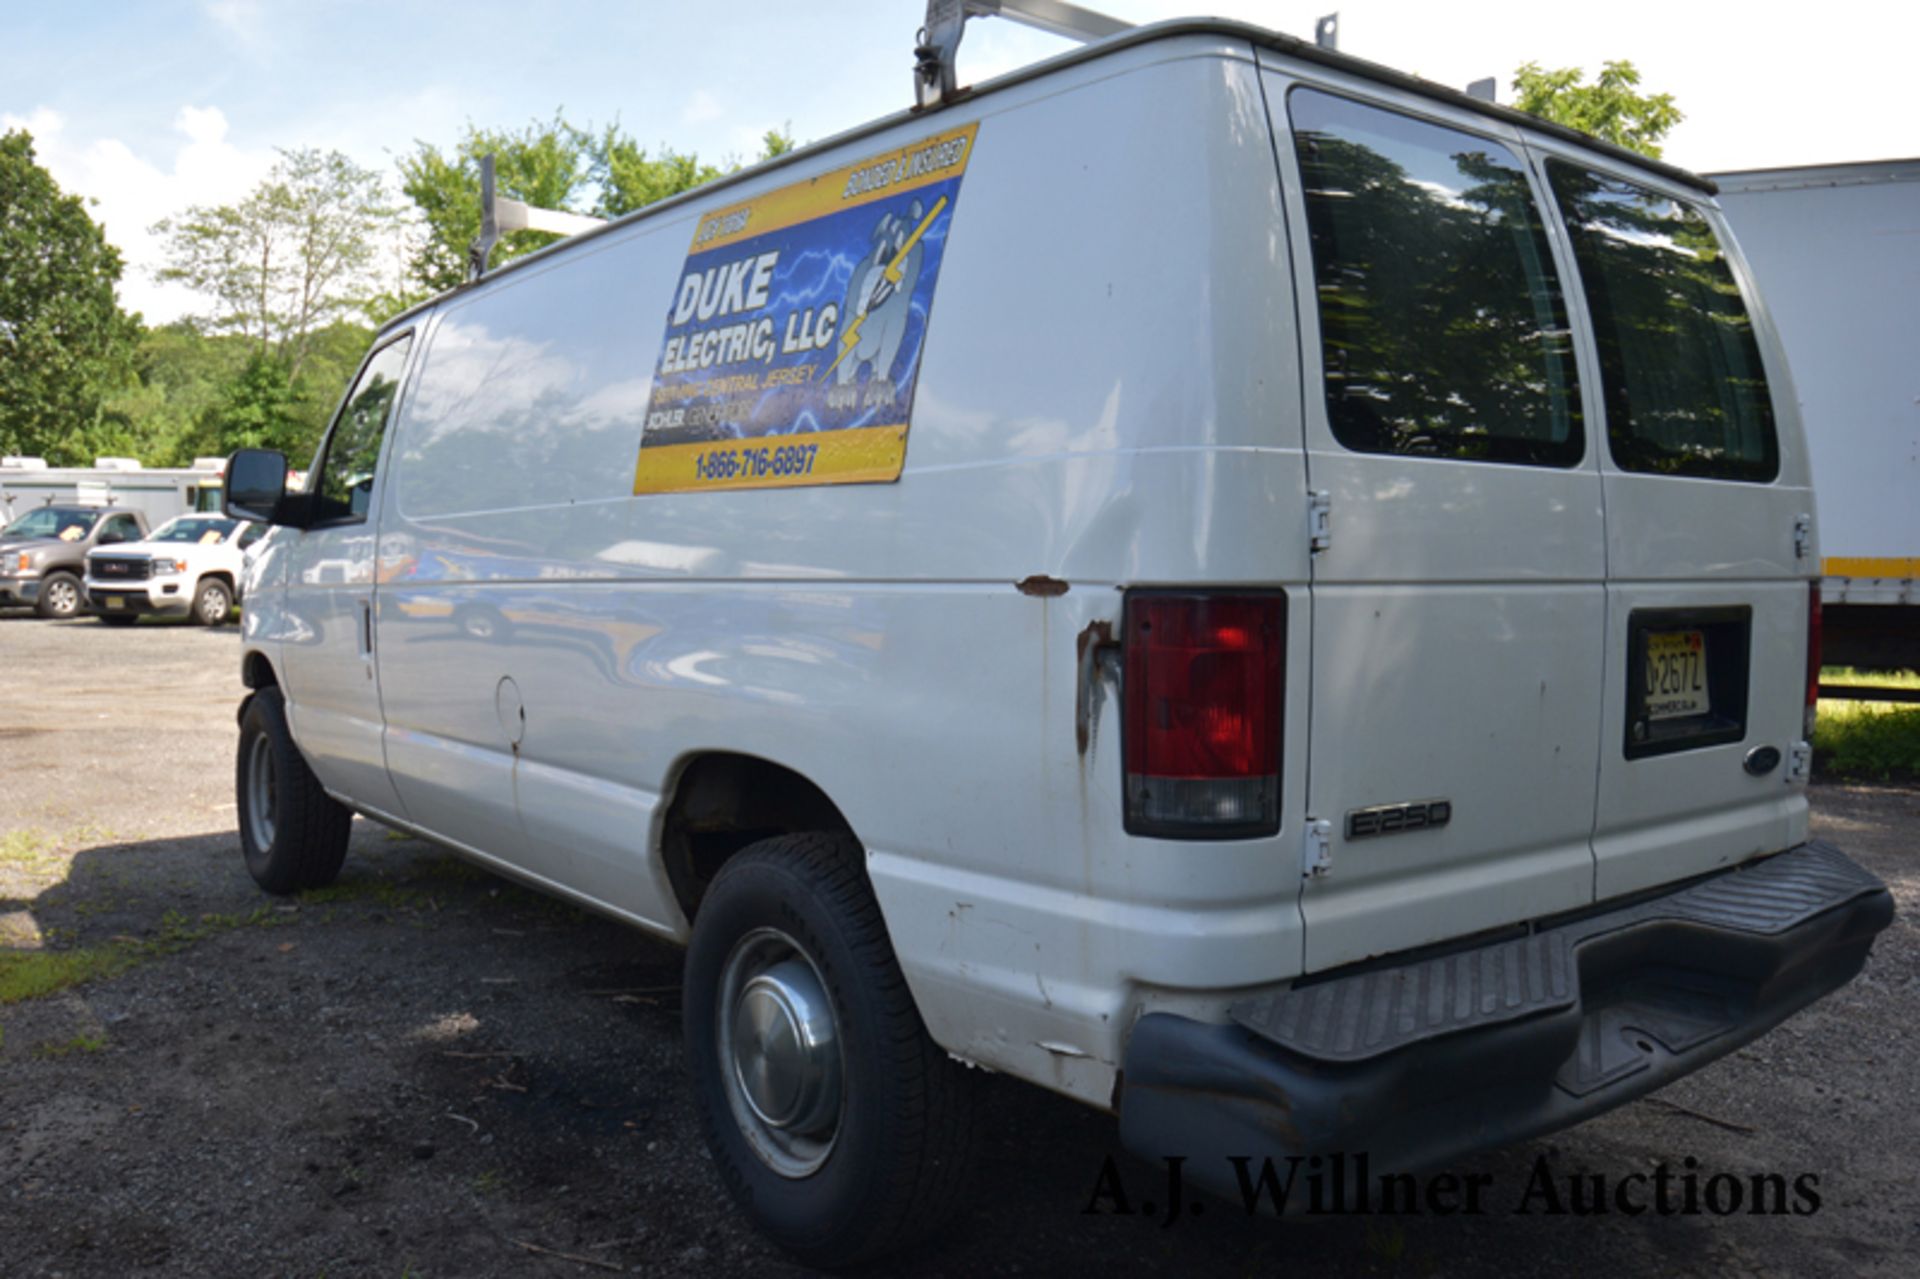 2006 Ford E250 Super-Duty Cargo van VIN 1FTNE24W66HB09381 221,710 miles indicated on odometer w/ 4- - Image 3 of 7